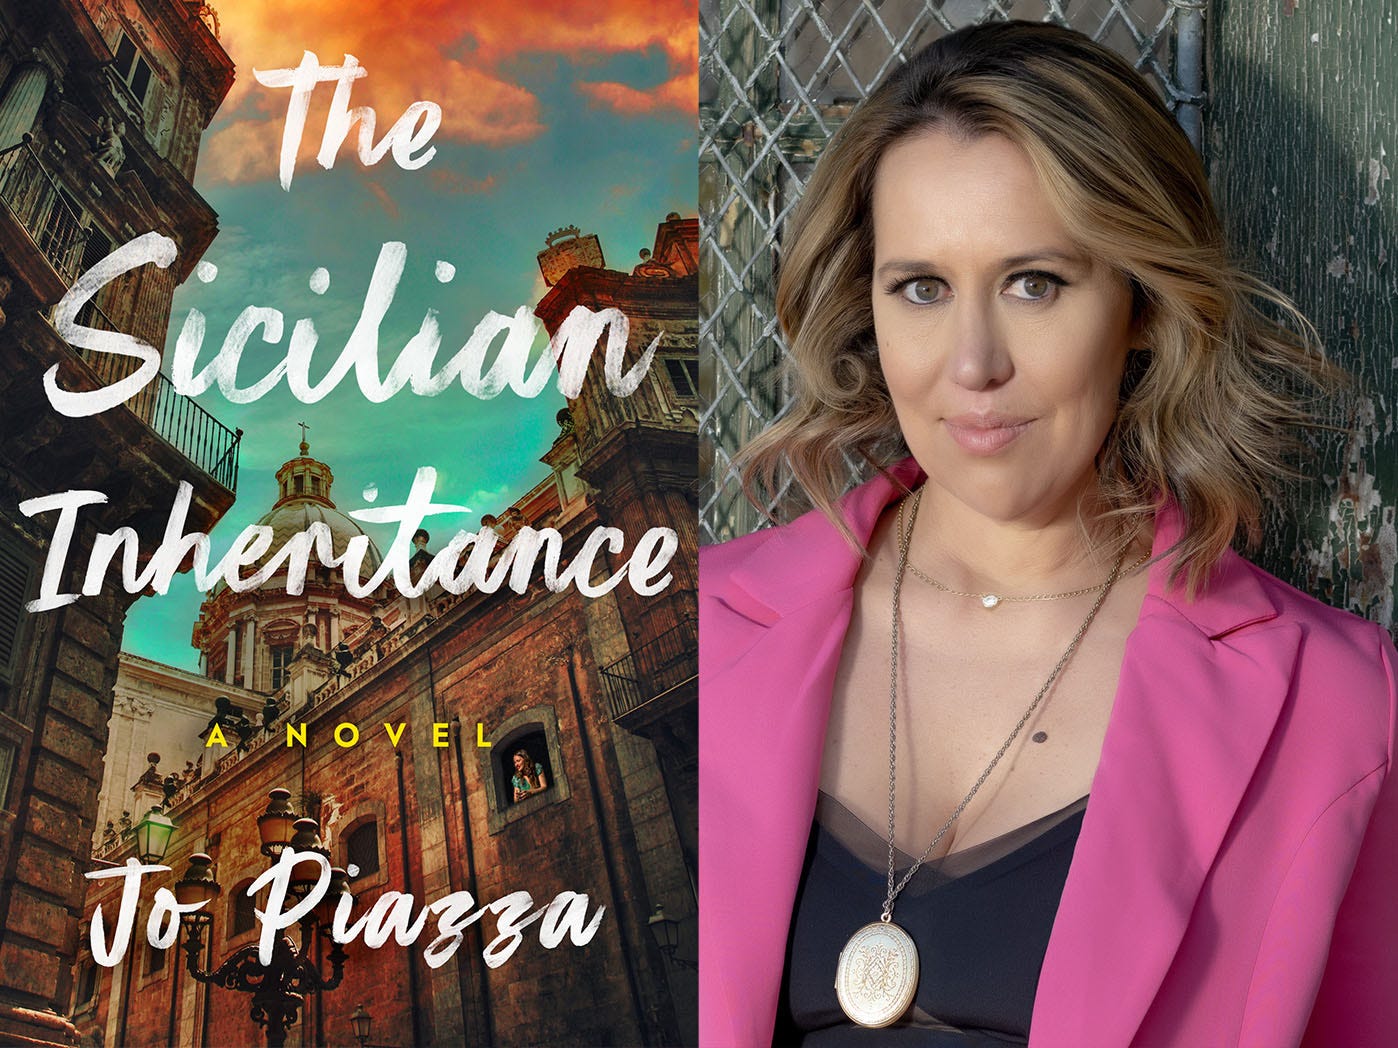 The cover of the novel "The Sicilian Inheritance" by Jo Piazza is on the left. It depicts brick buildings in Sicily under a blue sky. Next to it is a head shot of author Jo Piazza where she stands against a wall and wears a bright pink blazer.